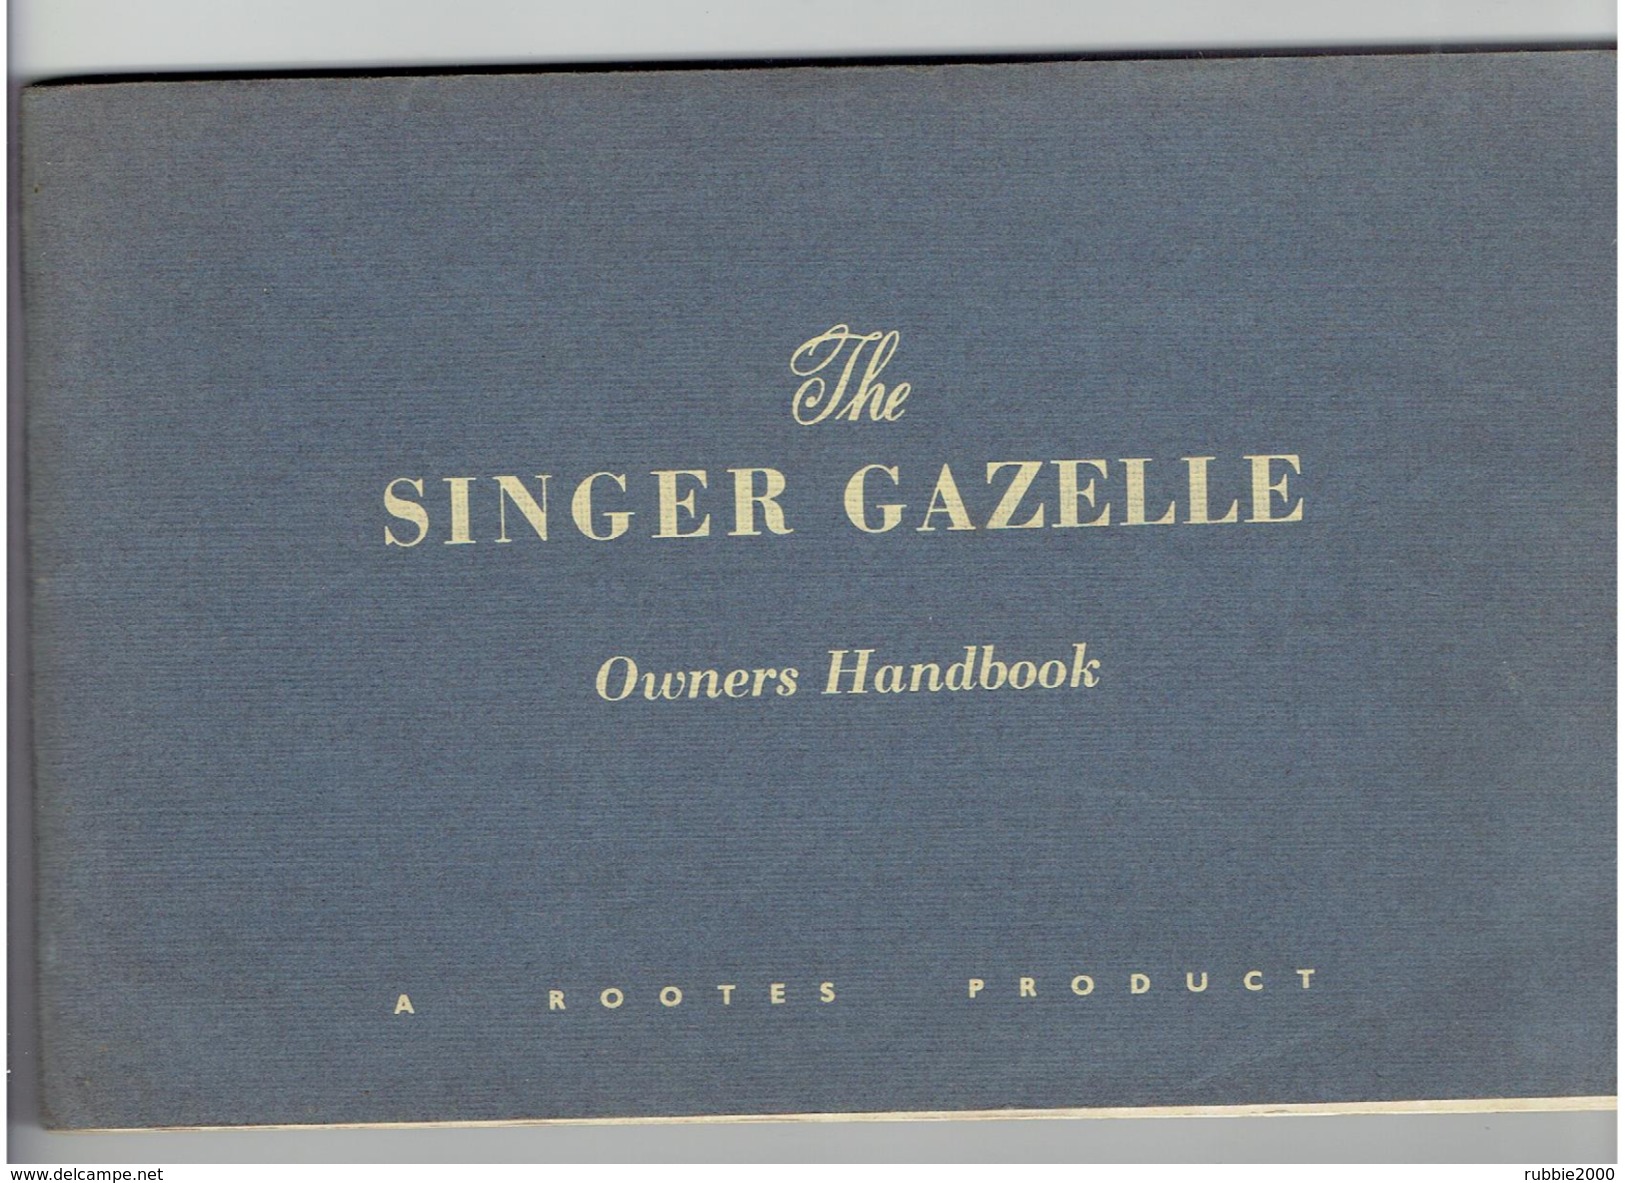 THE SINGER GAZELLE OWNERS HANDBOOK ISSUED 1958 SINGER MOTORS LIMITED COVENTRY ENGLAND A ROOTES PRODUCT - Transportes